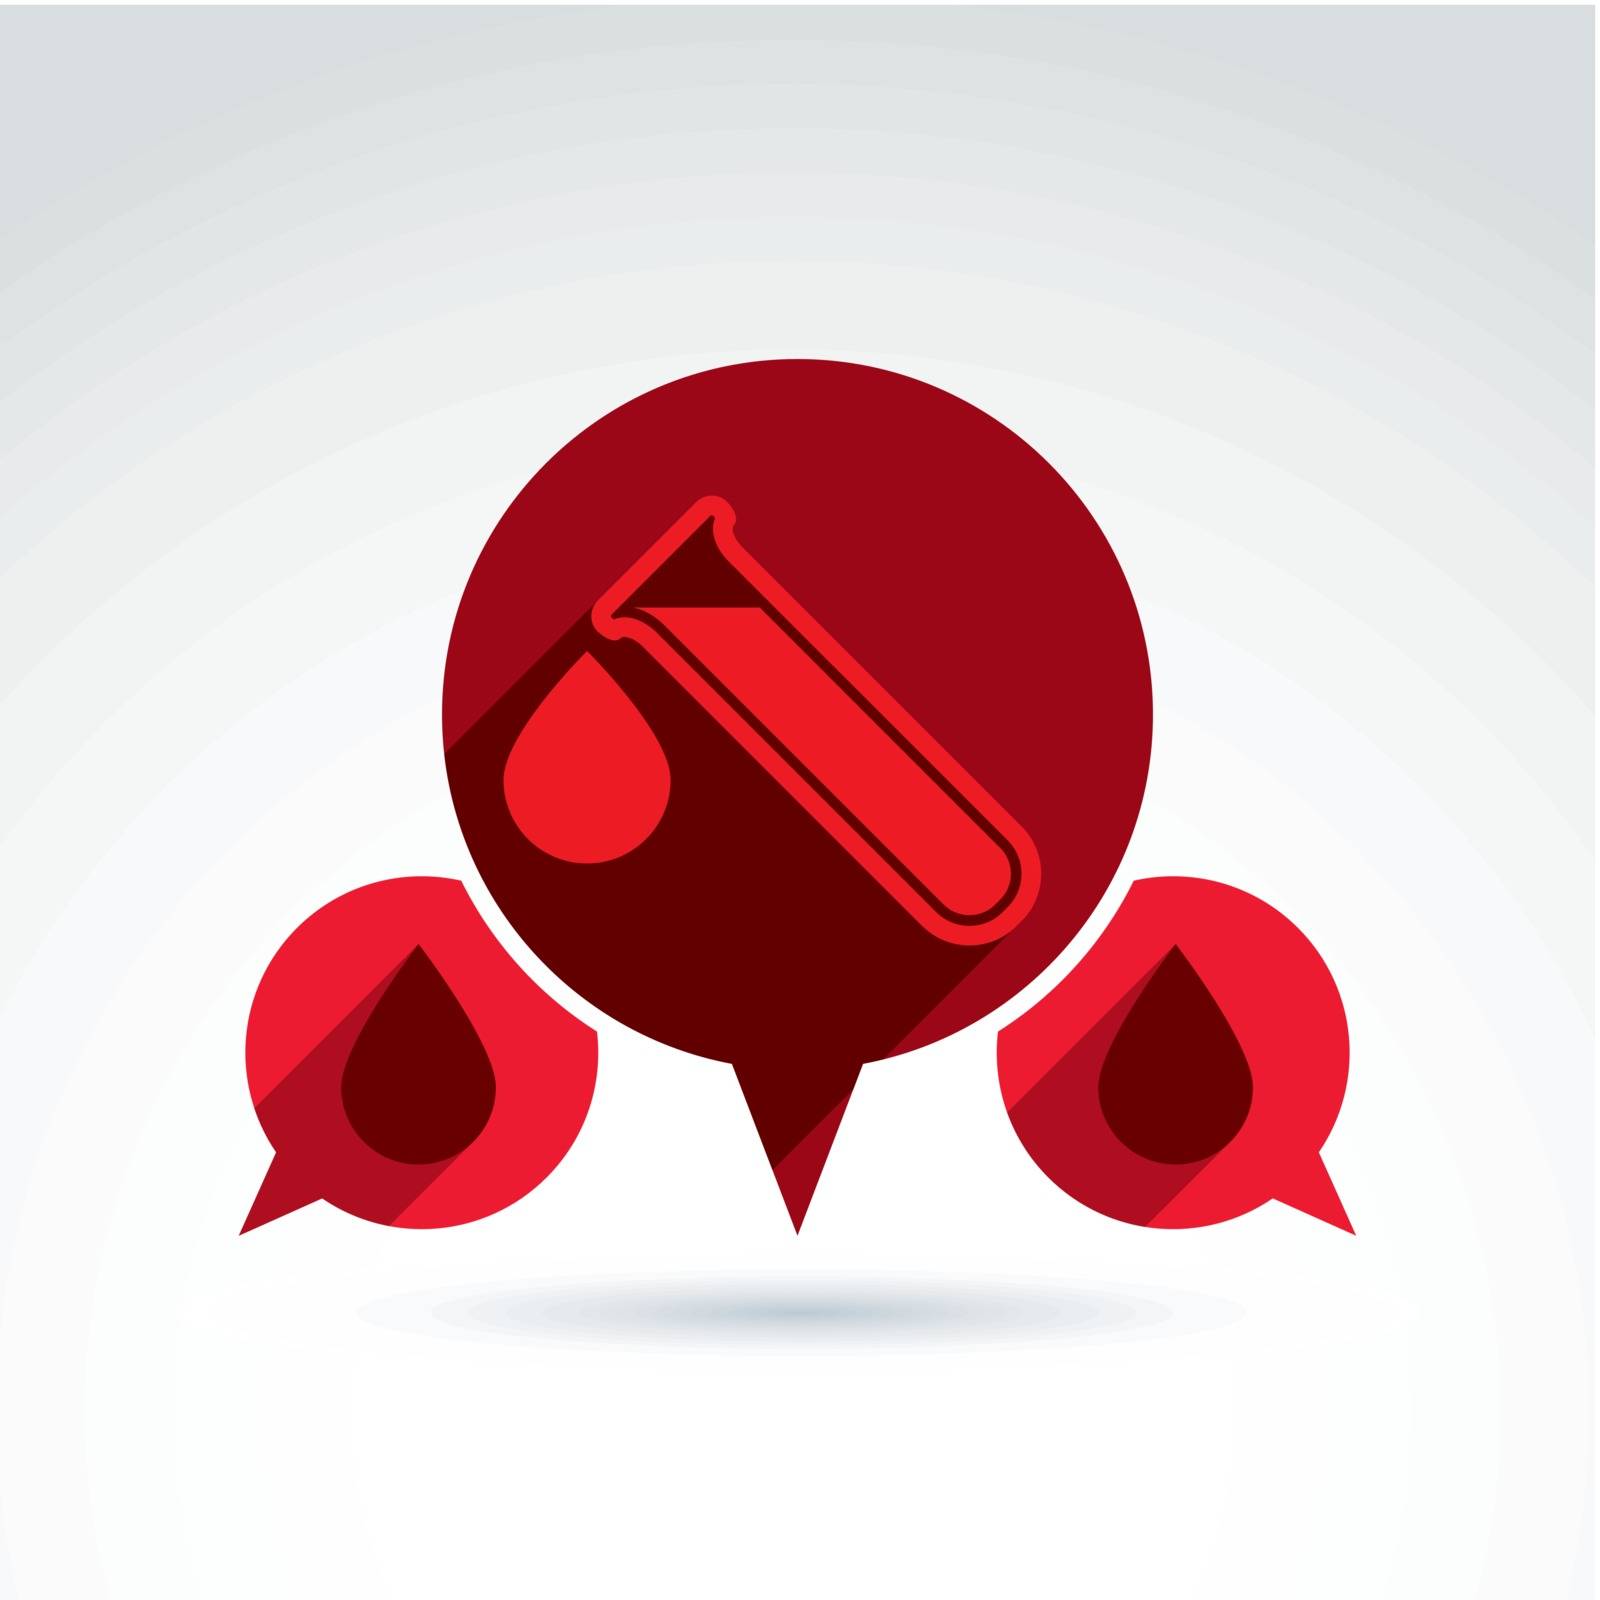 Donor blood and Circulatory system icon, vector conceptual stylish symbol for your design.